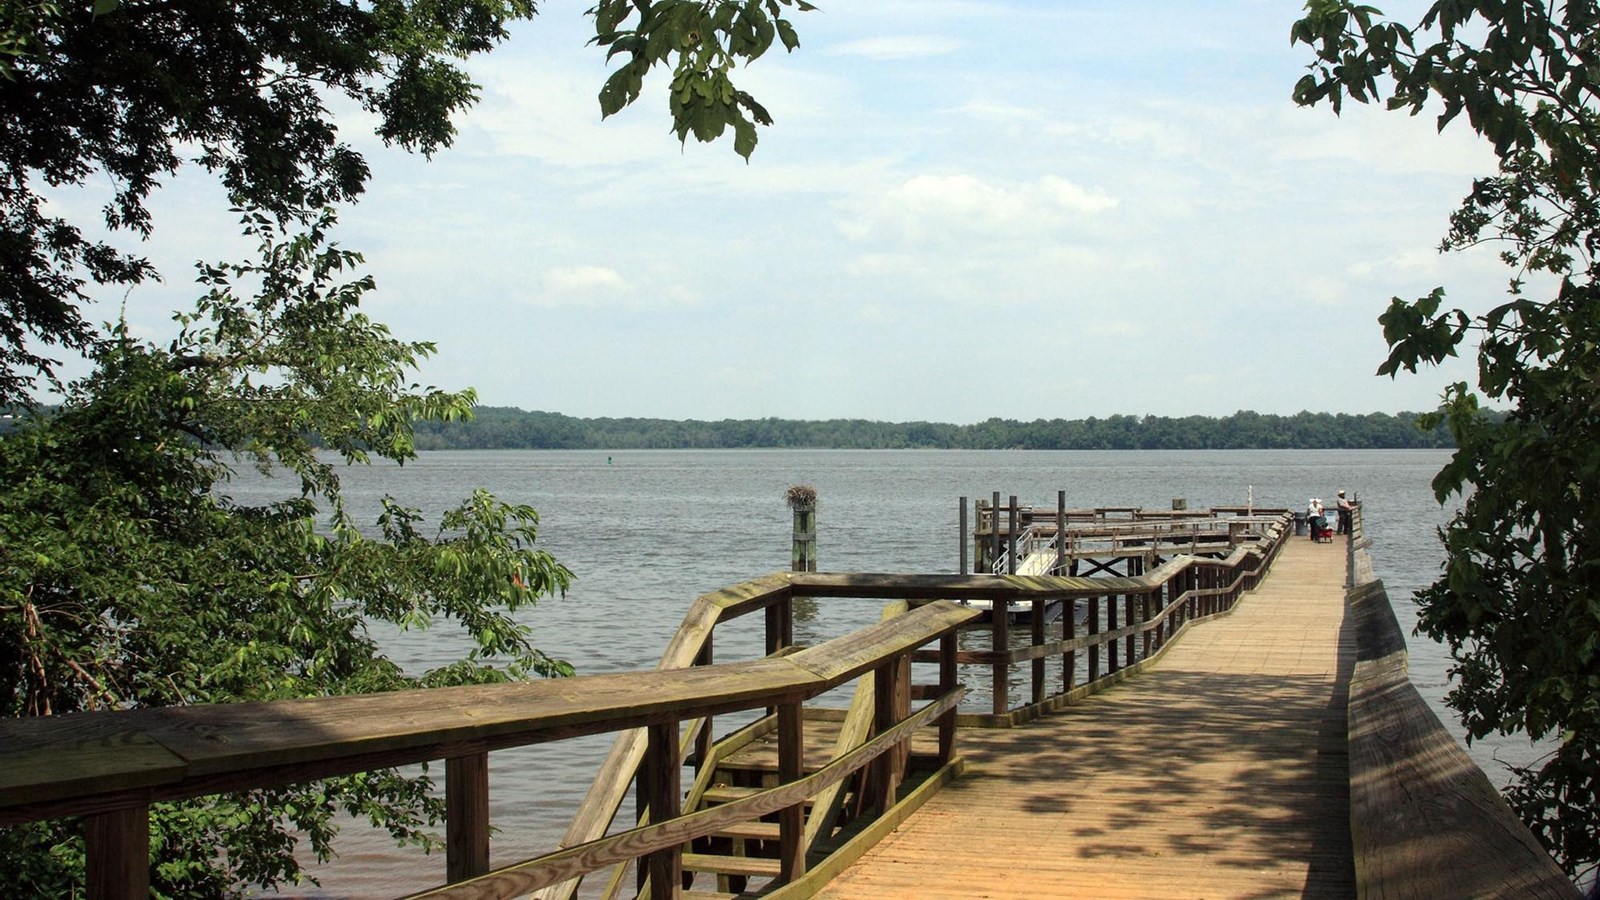 A wooden pier extends past the tree line into a grey blue river